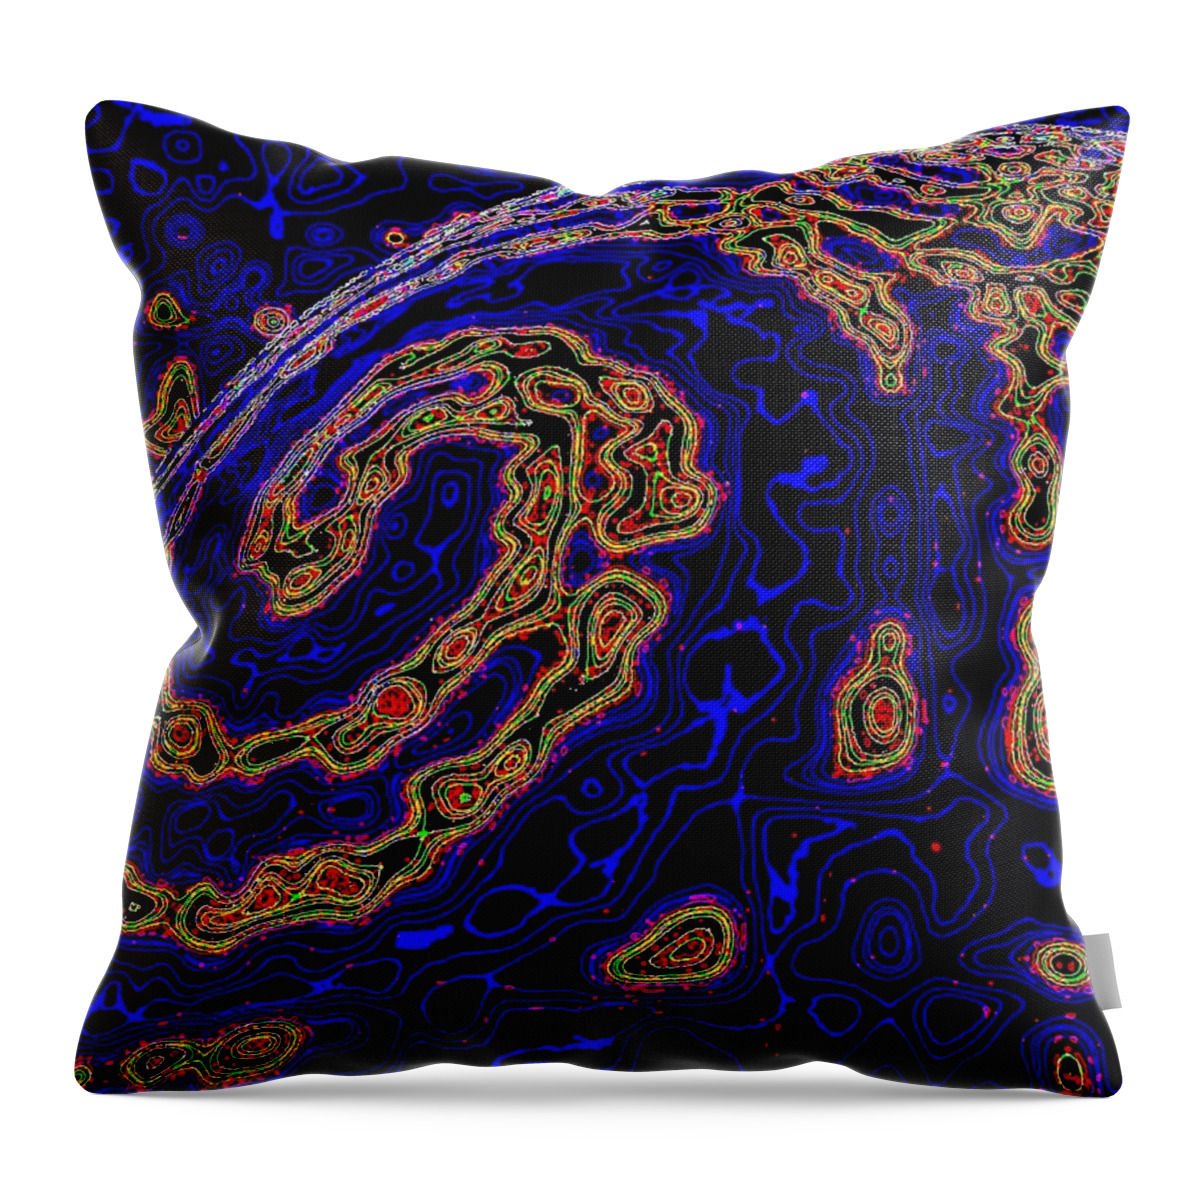 Micro Planet Throw Pillow featuring the digital art Micro Planet by Will Borden